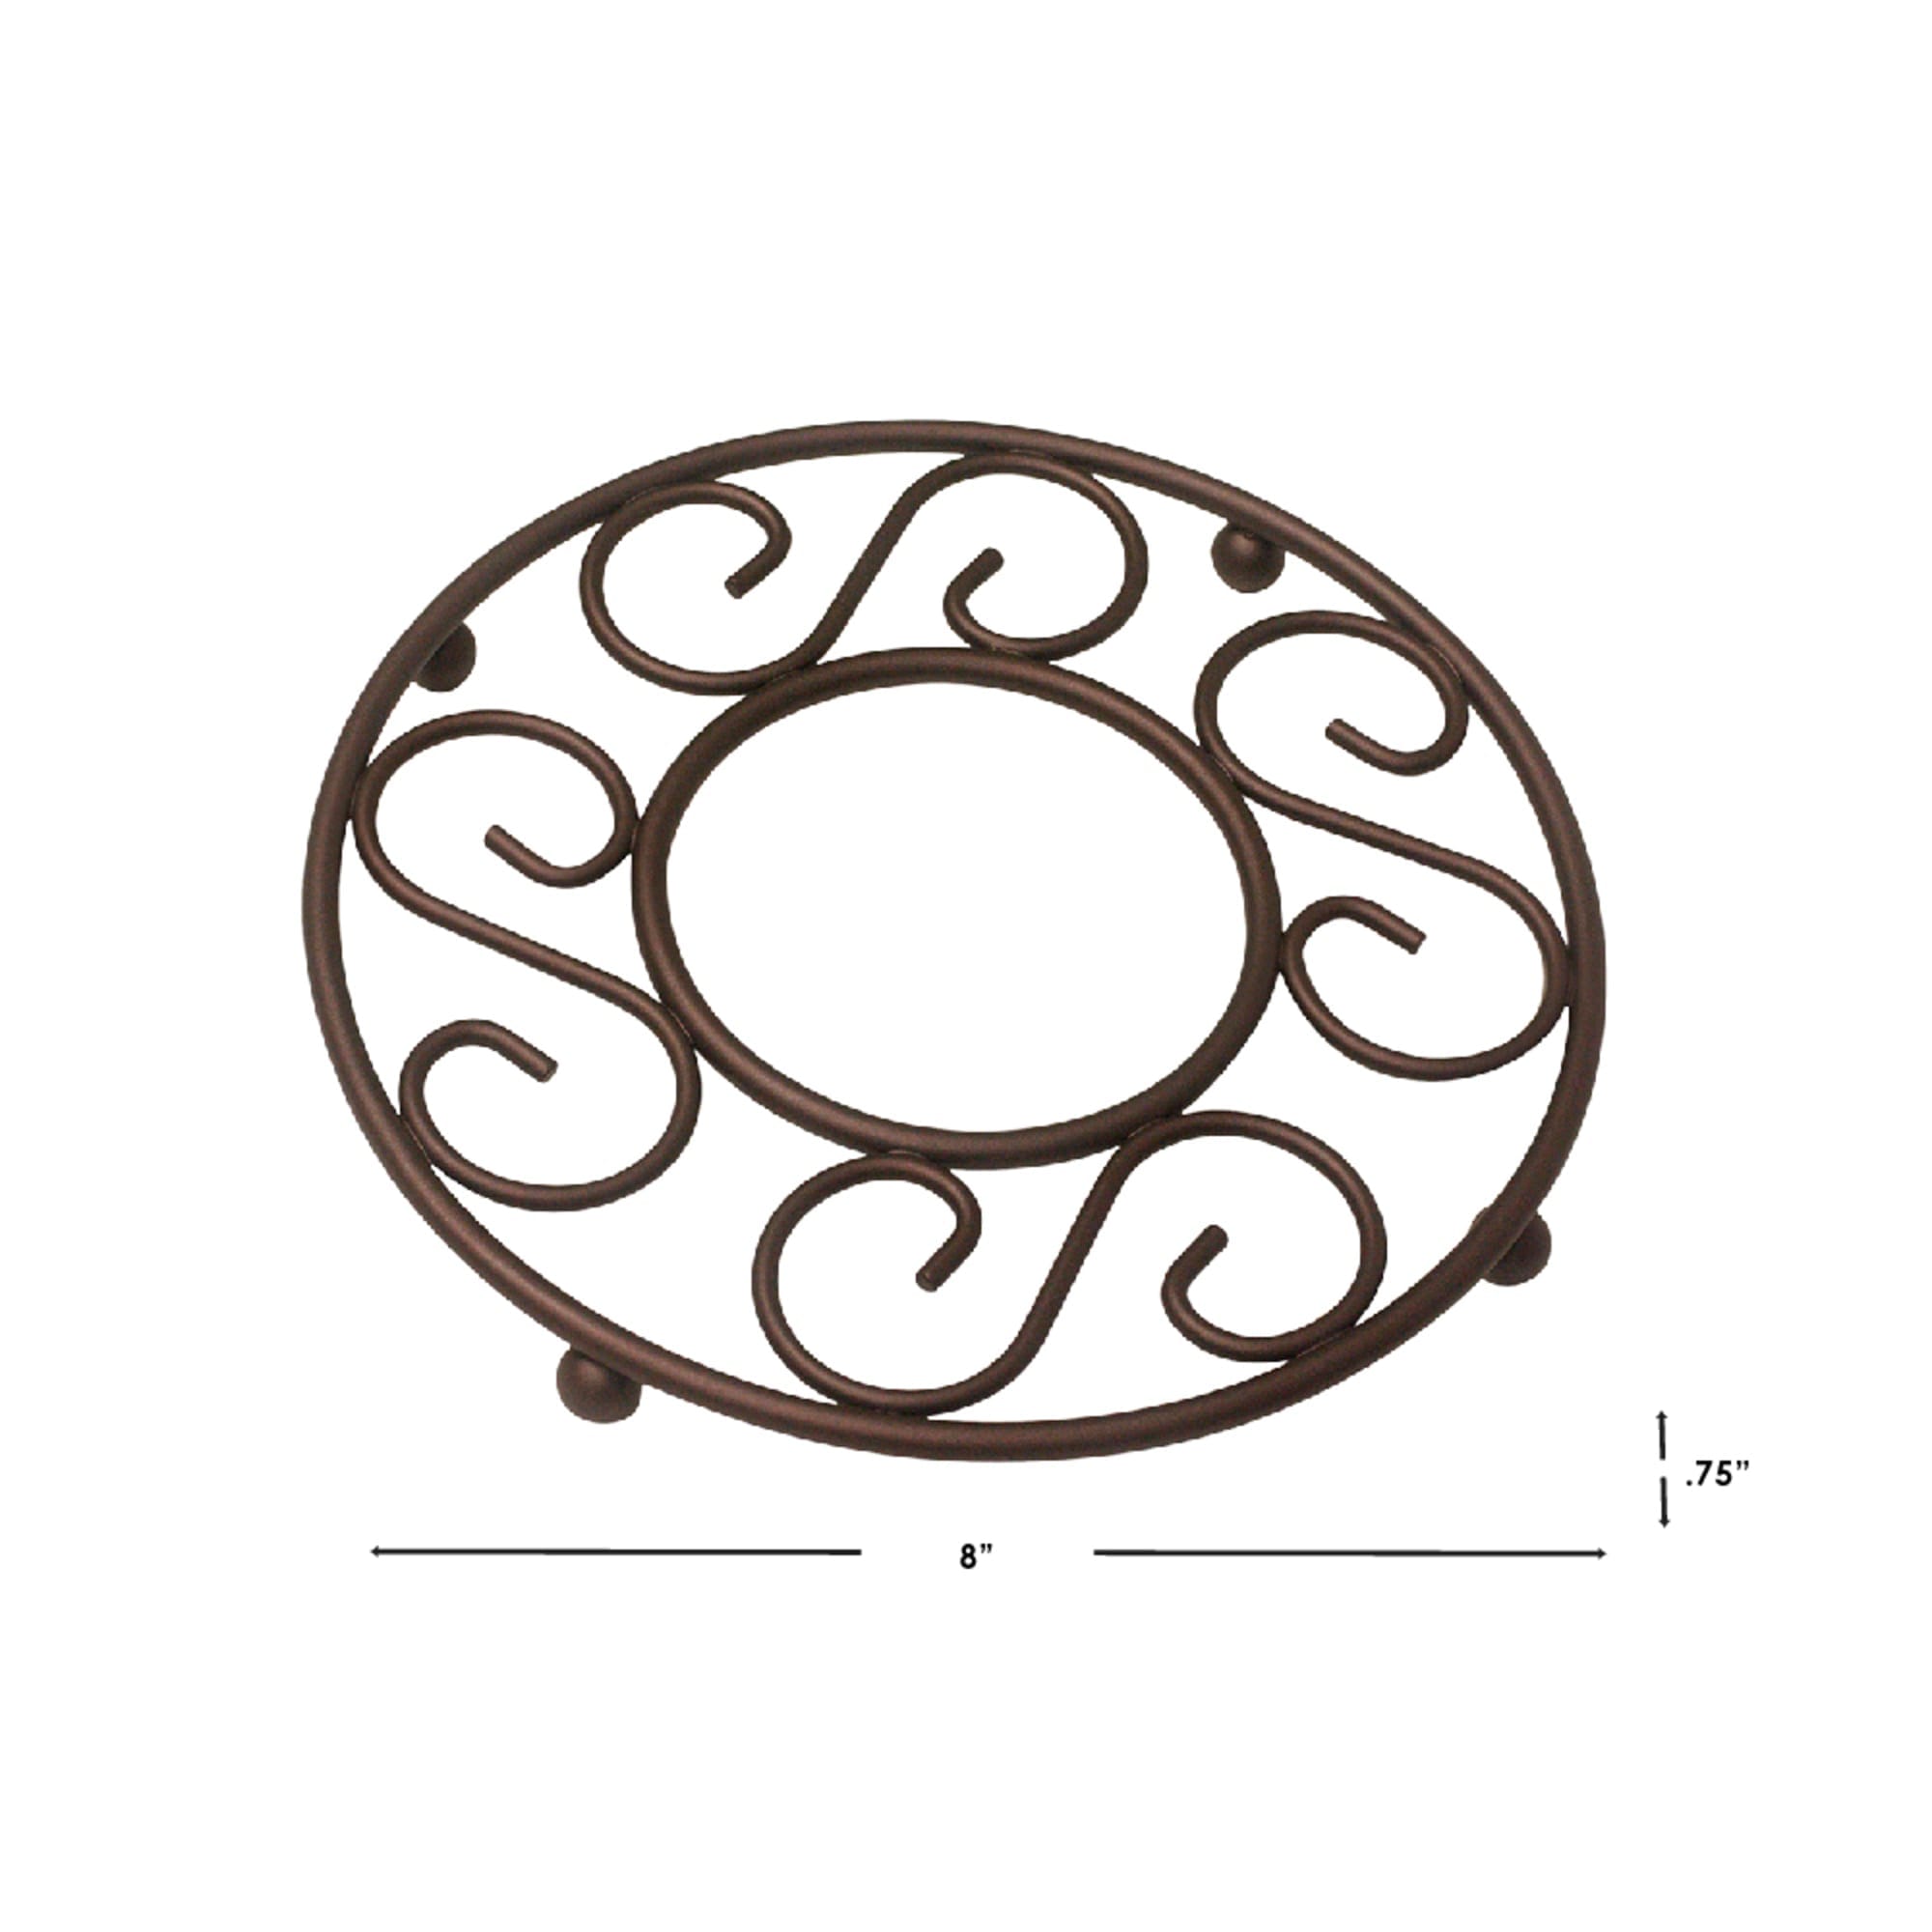 Home Basics Scroll Collection Steel Trivet, Bronze $3.00 EACH, CASE PACK OF 6